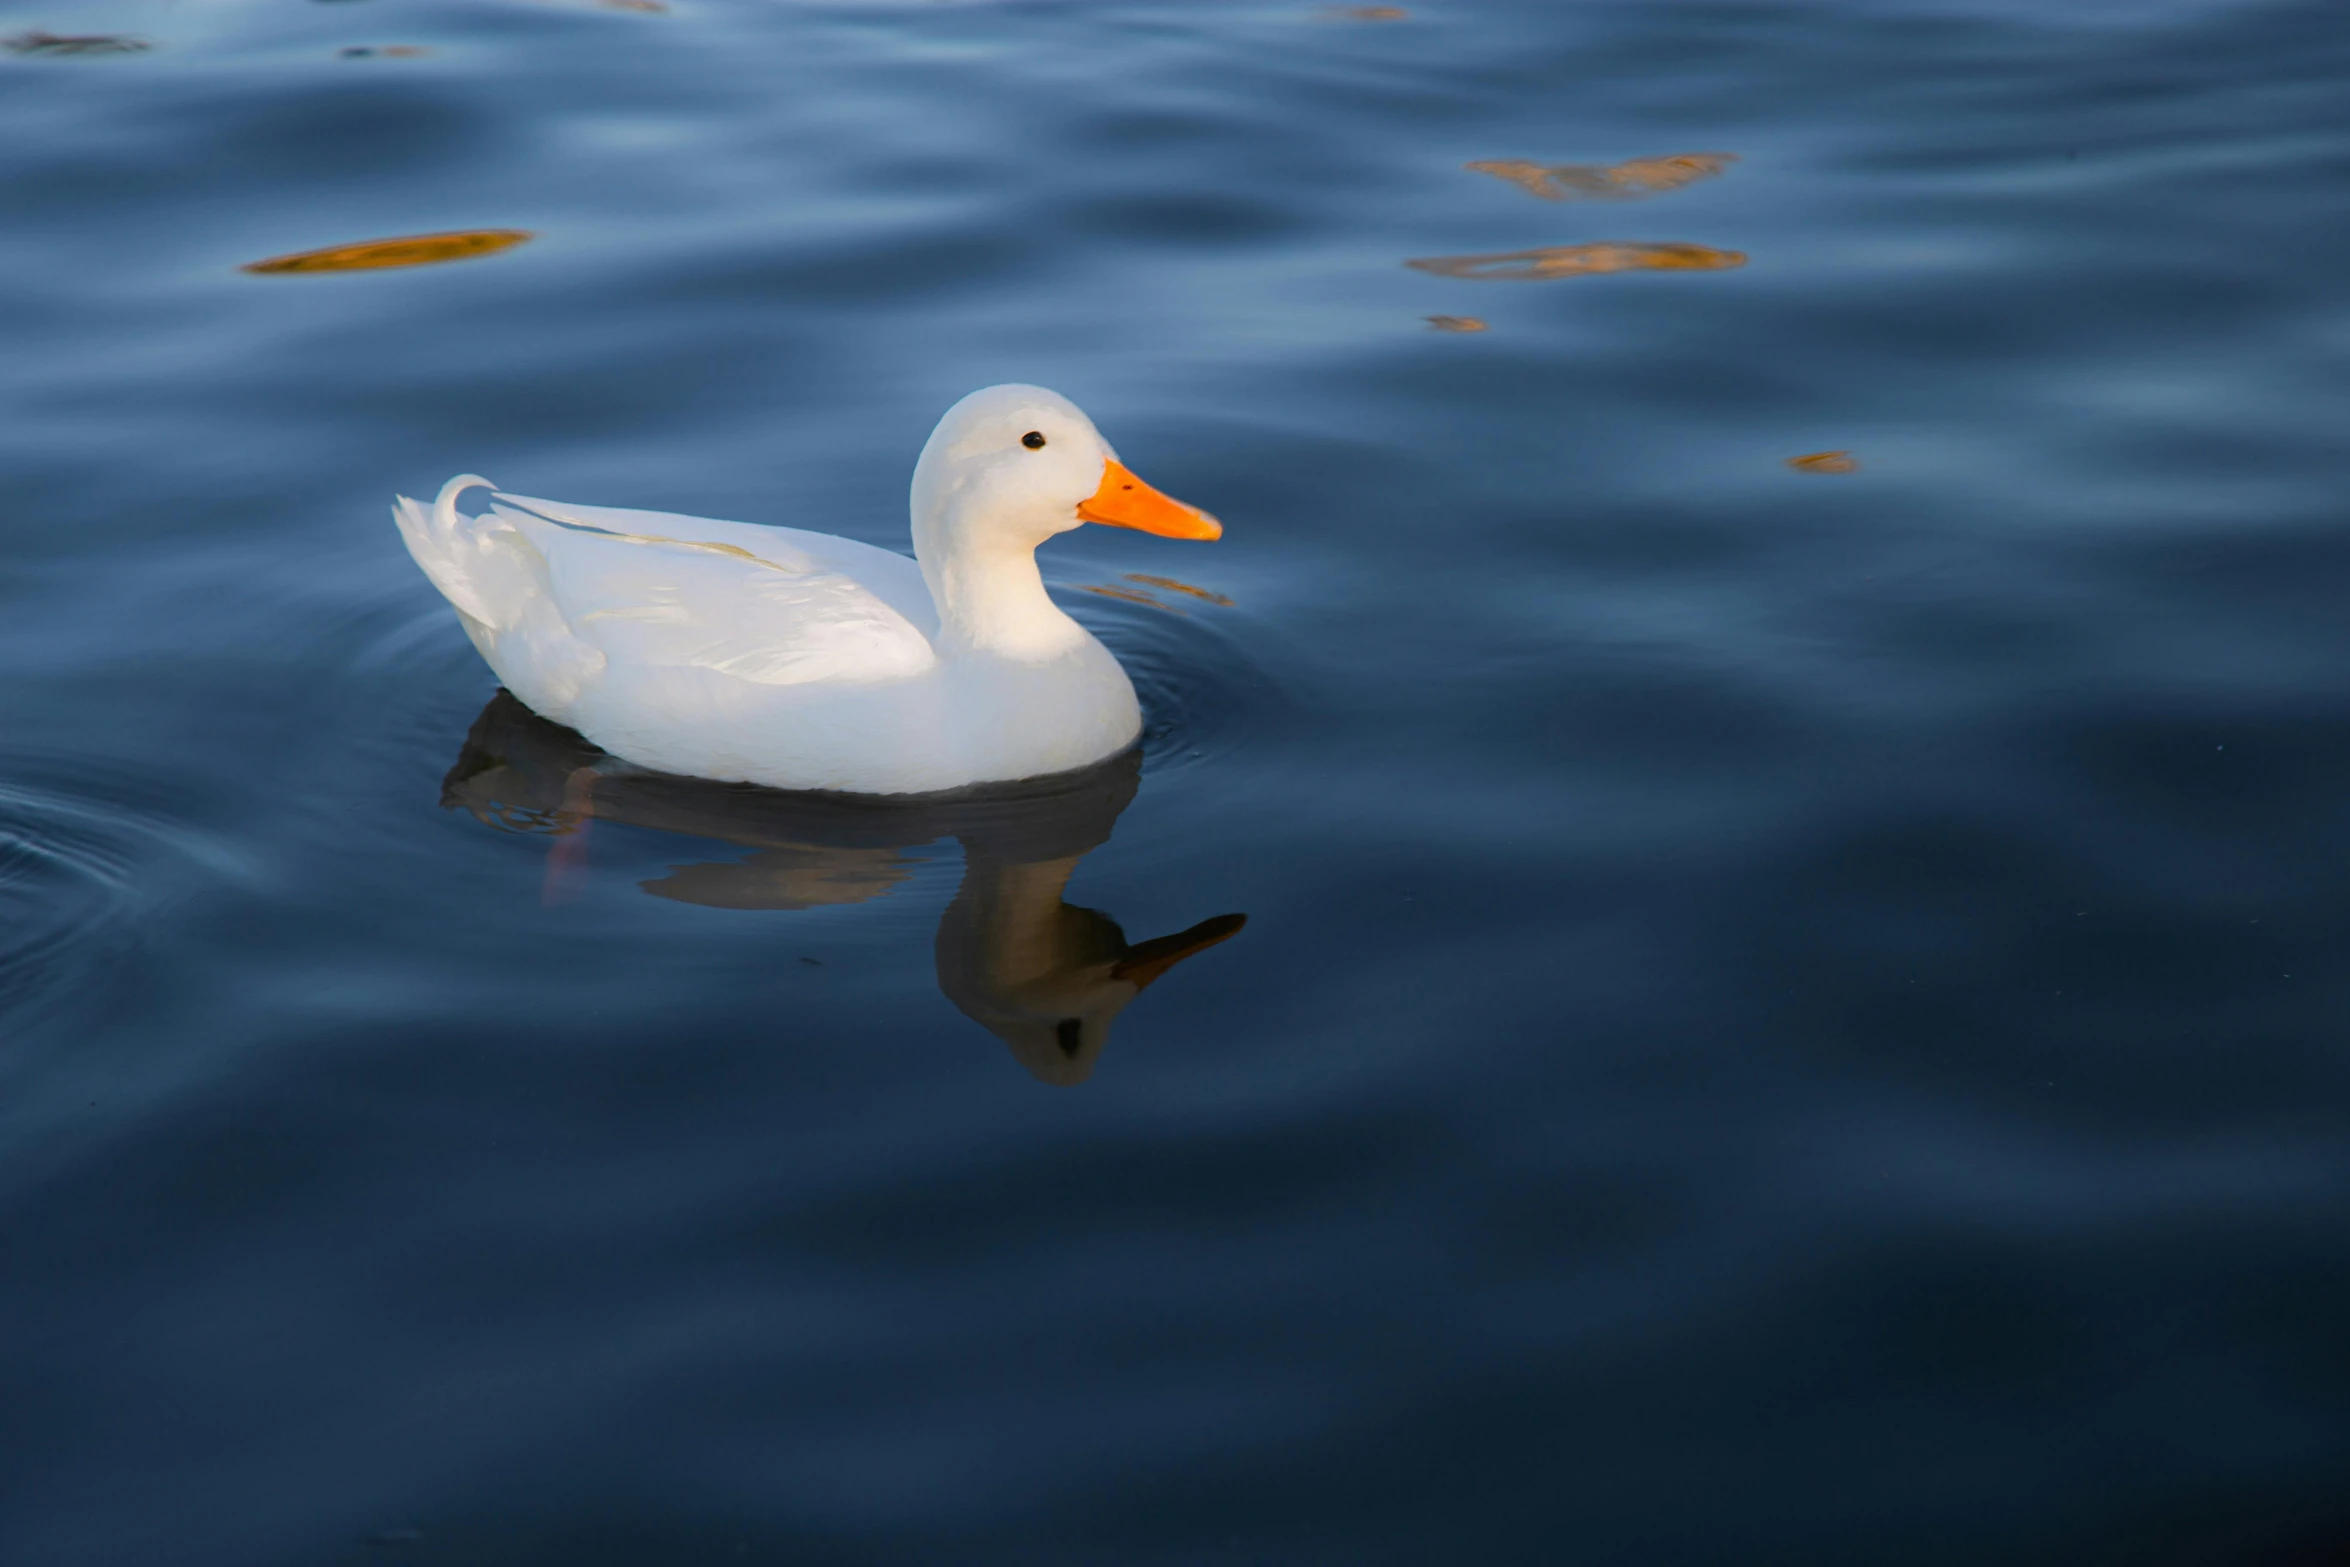 a white duck swims through a body of water